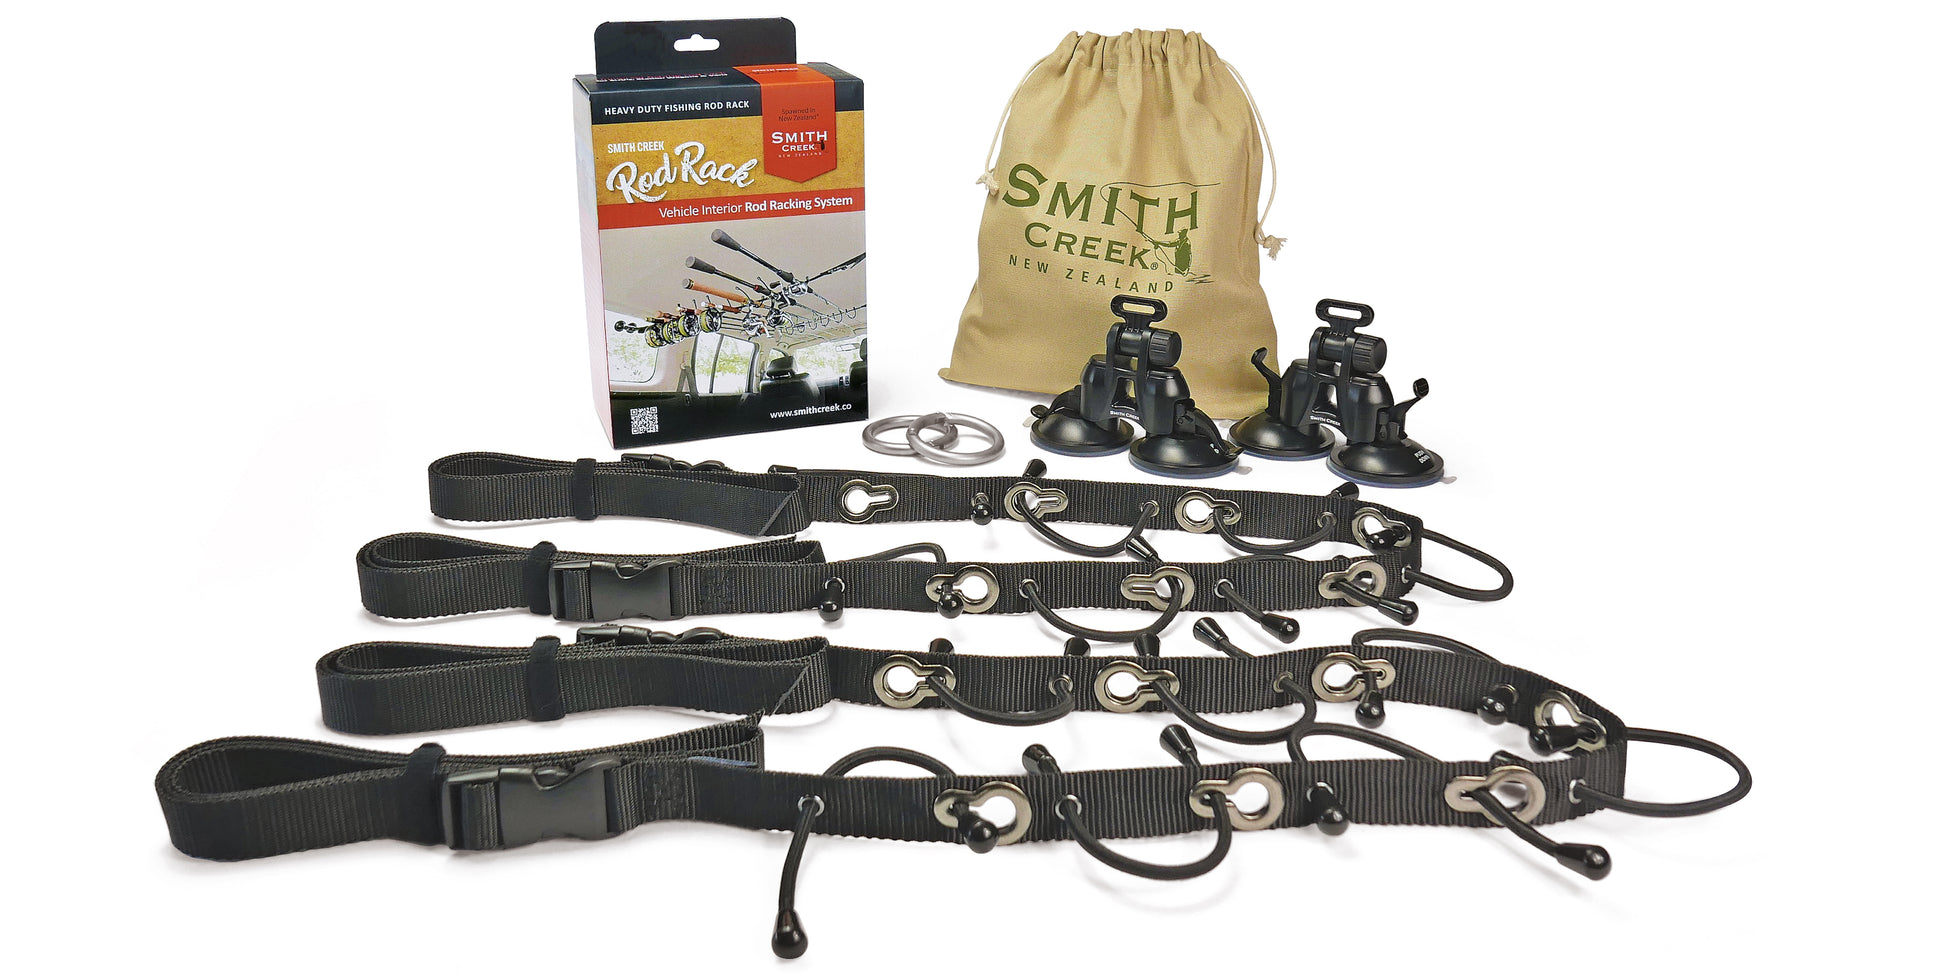 Rod Rack  Smith Creek Fly Fishing Tools and Gear